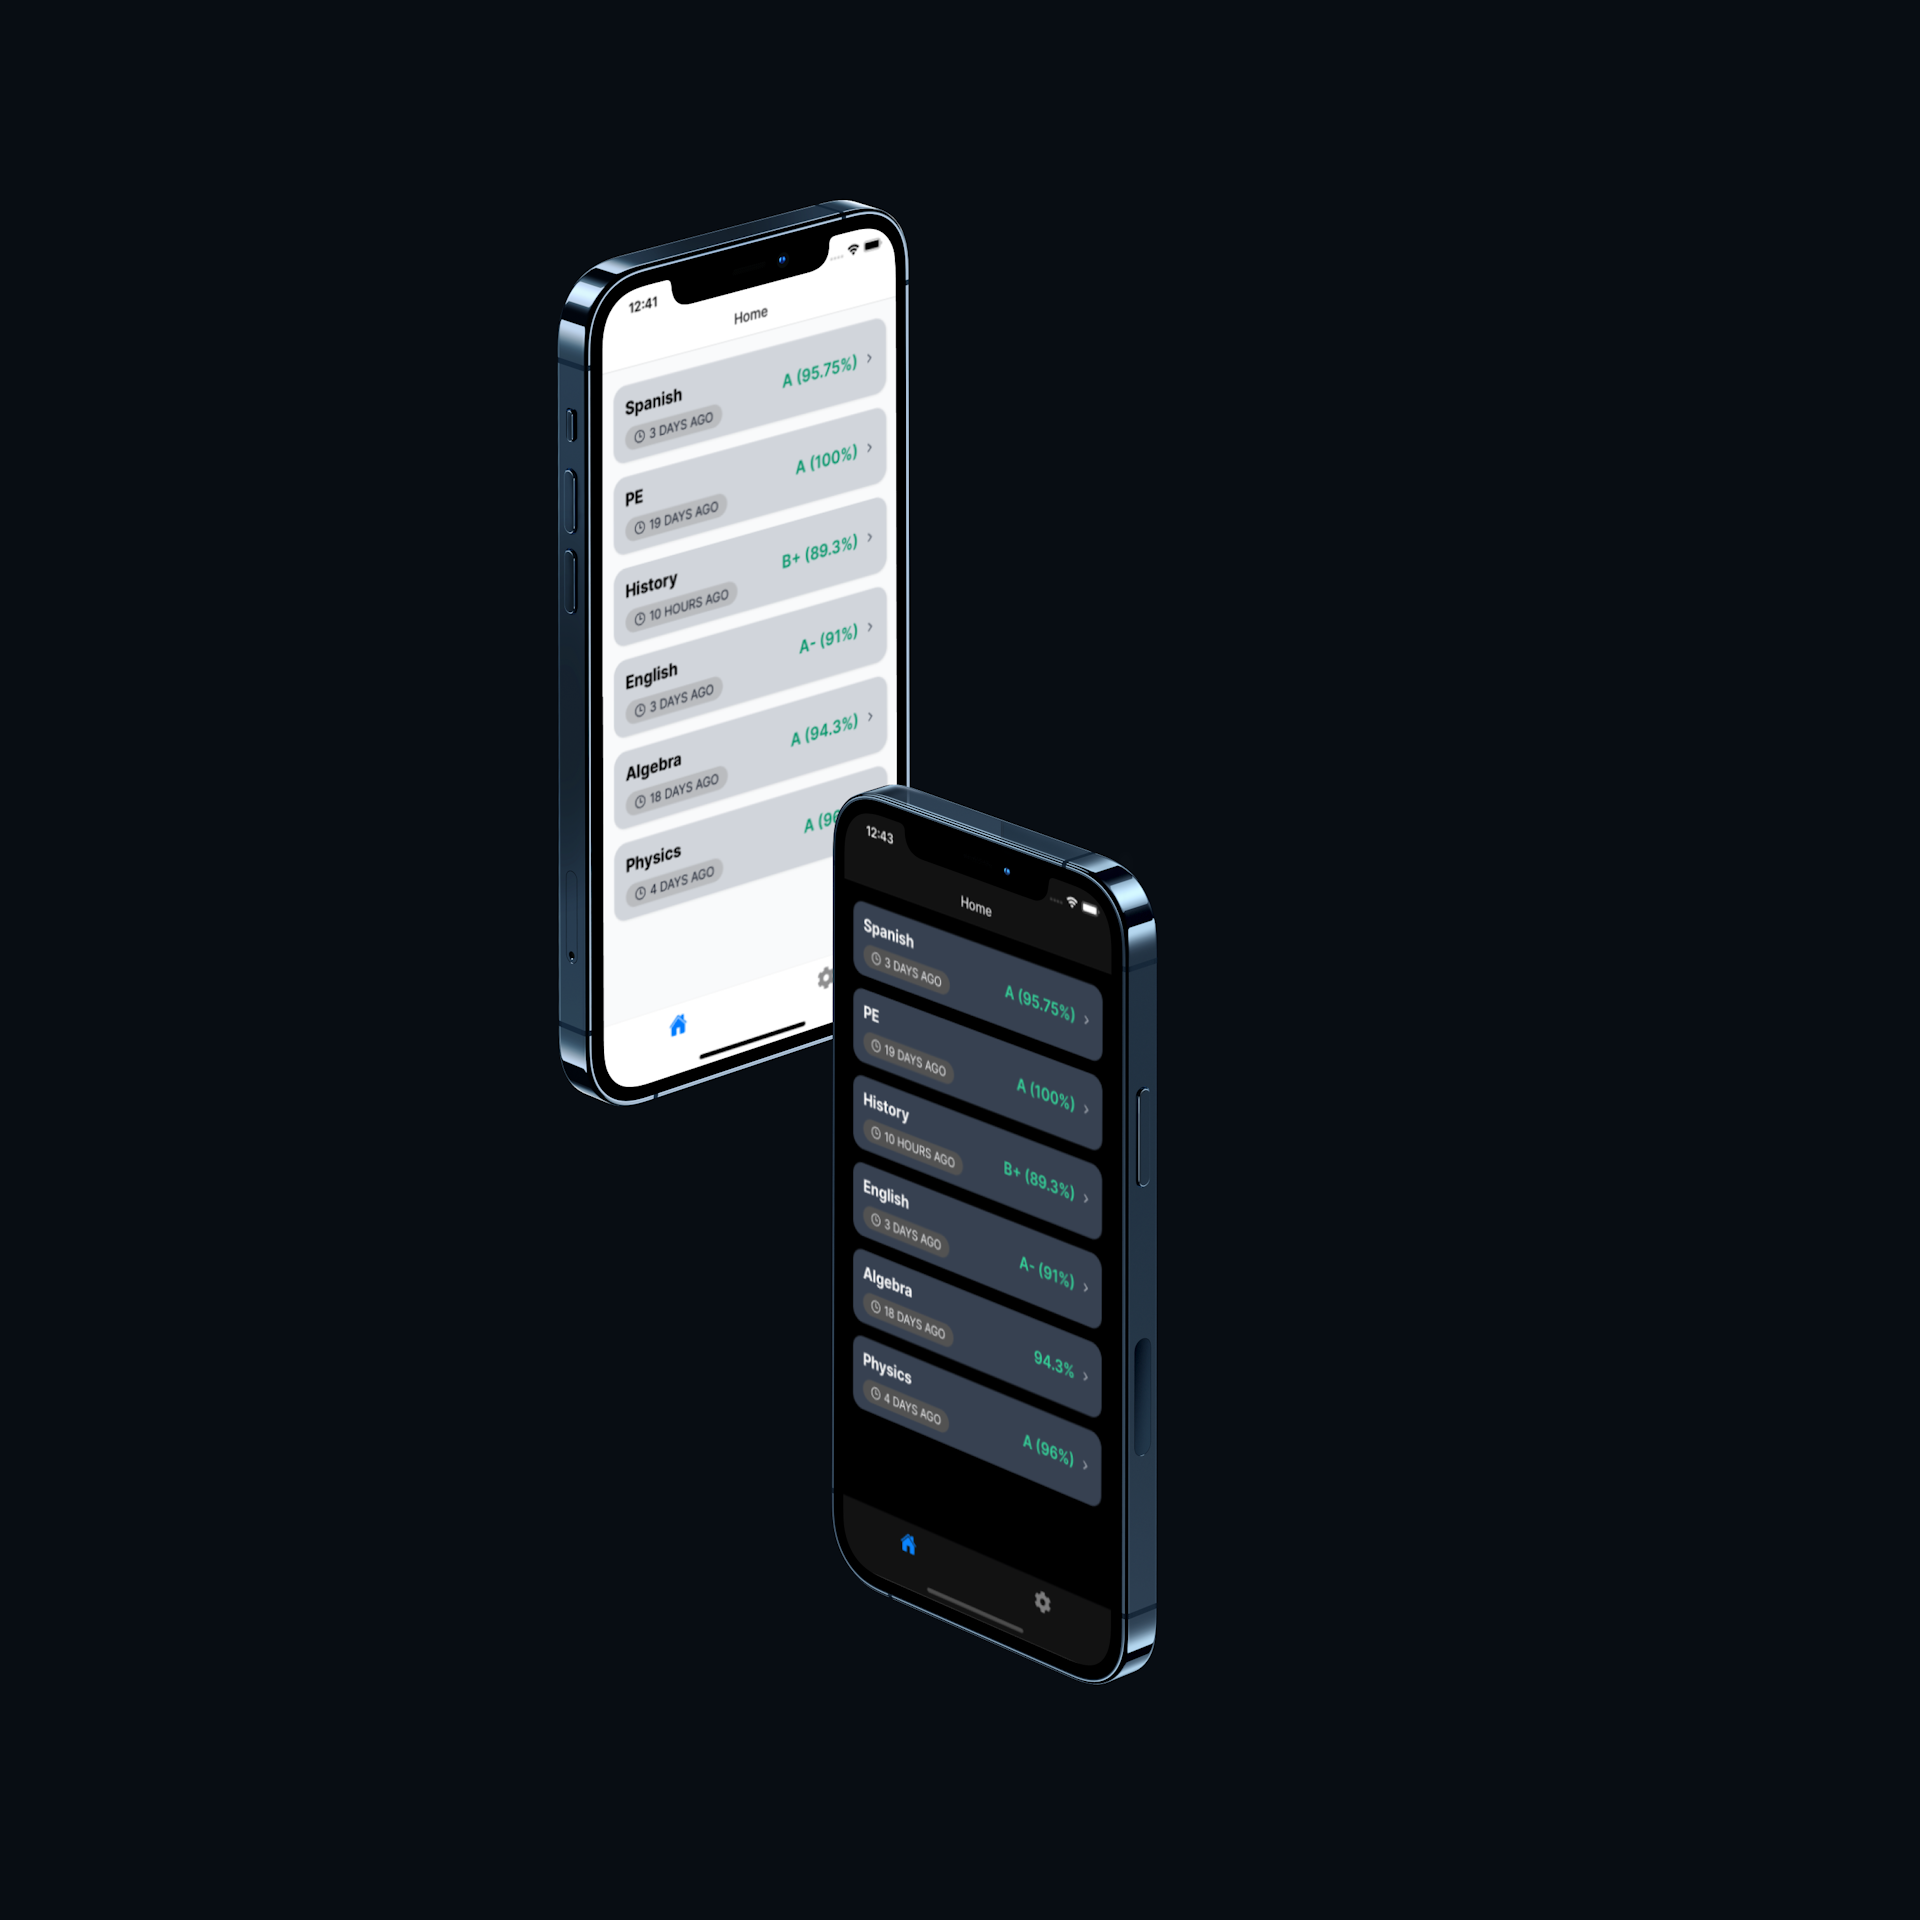 An image showing two iPhones side to side with the Bessy iOS home page, where one of the screens is in light mode while the other is in dark mode.